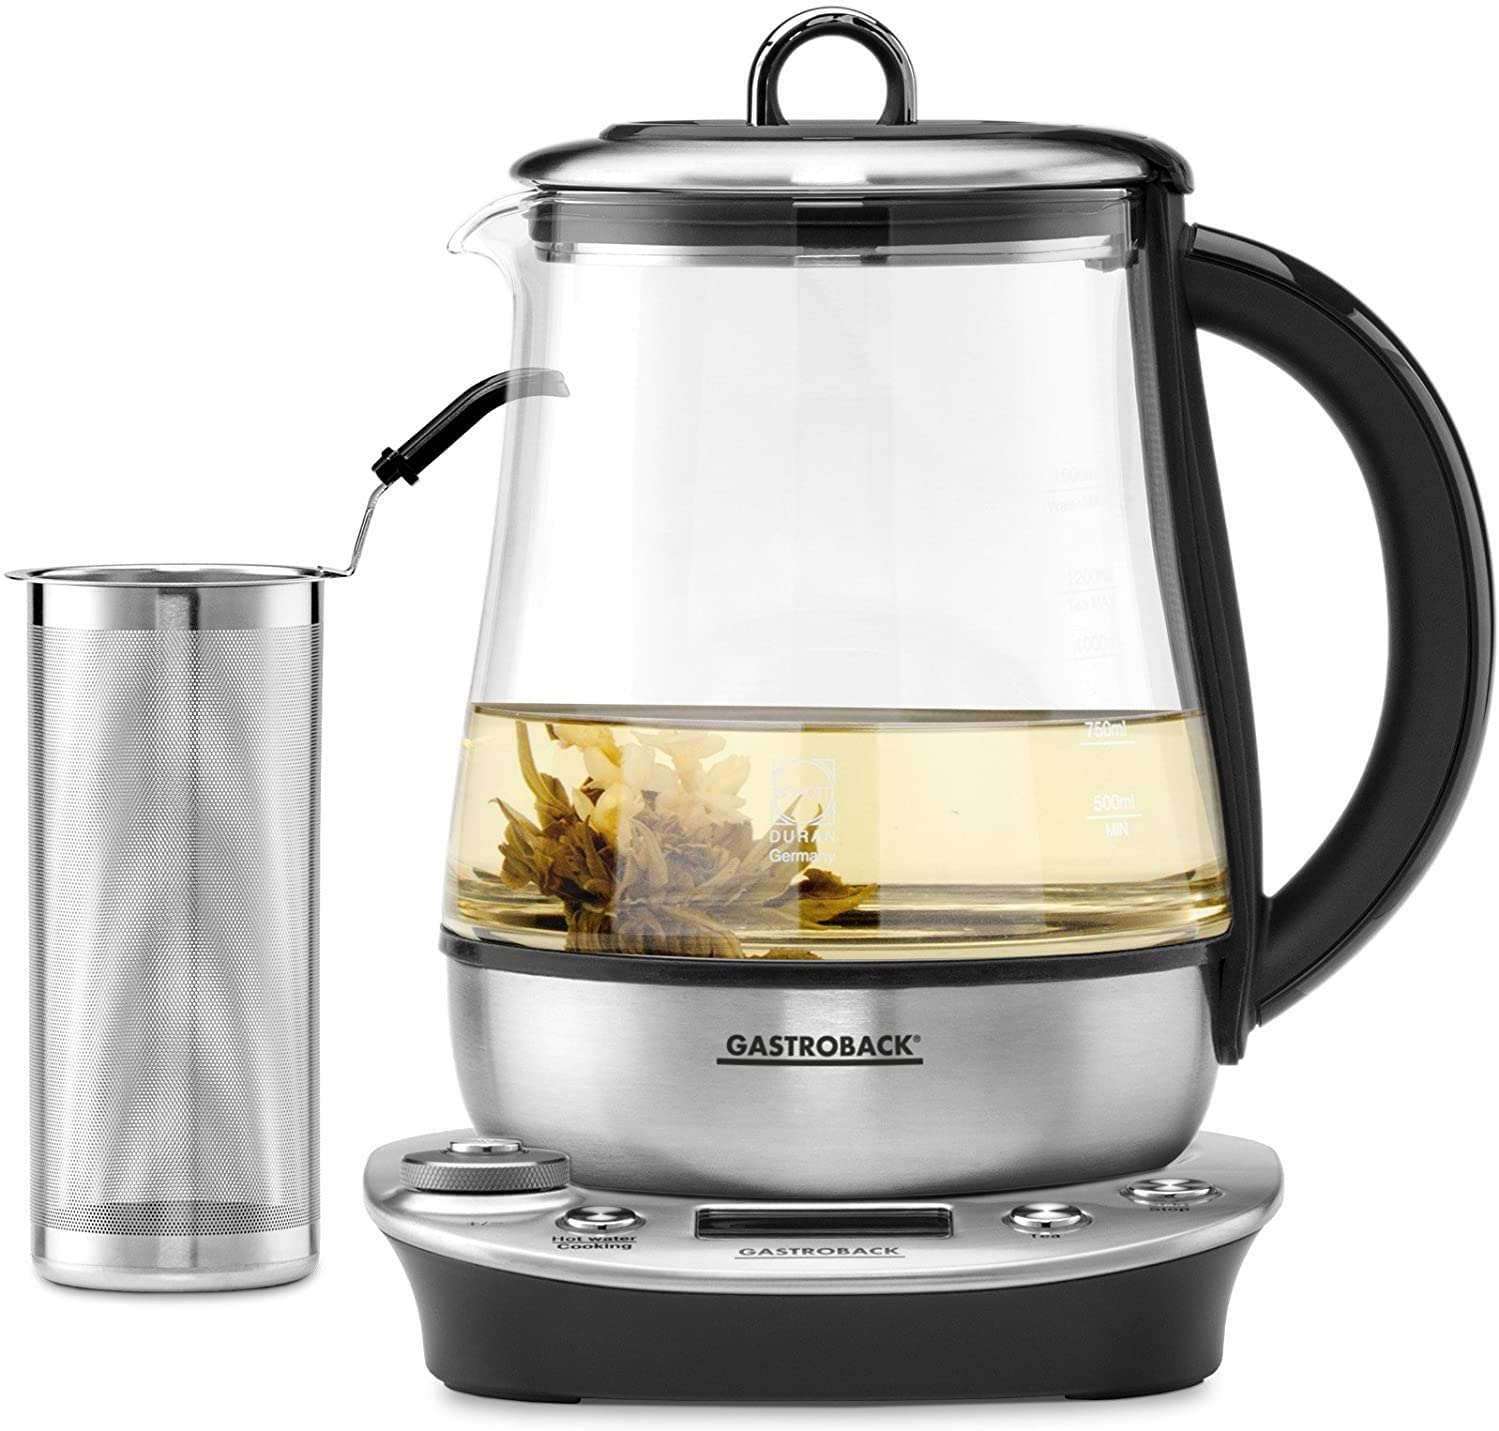 Gastroback 42438 Design Tea and More Advanced Automatic Tea Kettle and Kettle Multifunction Cooker